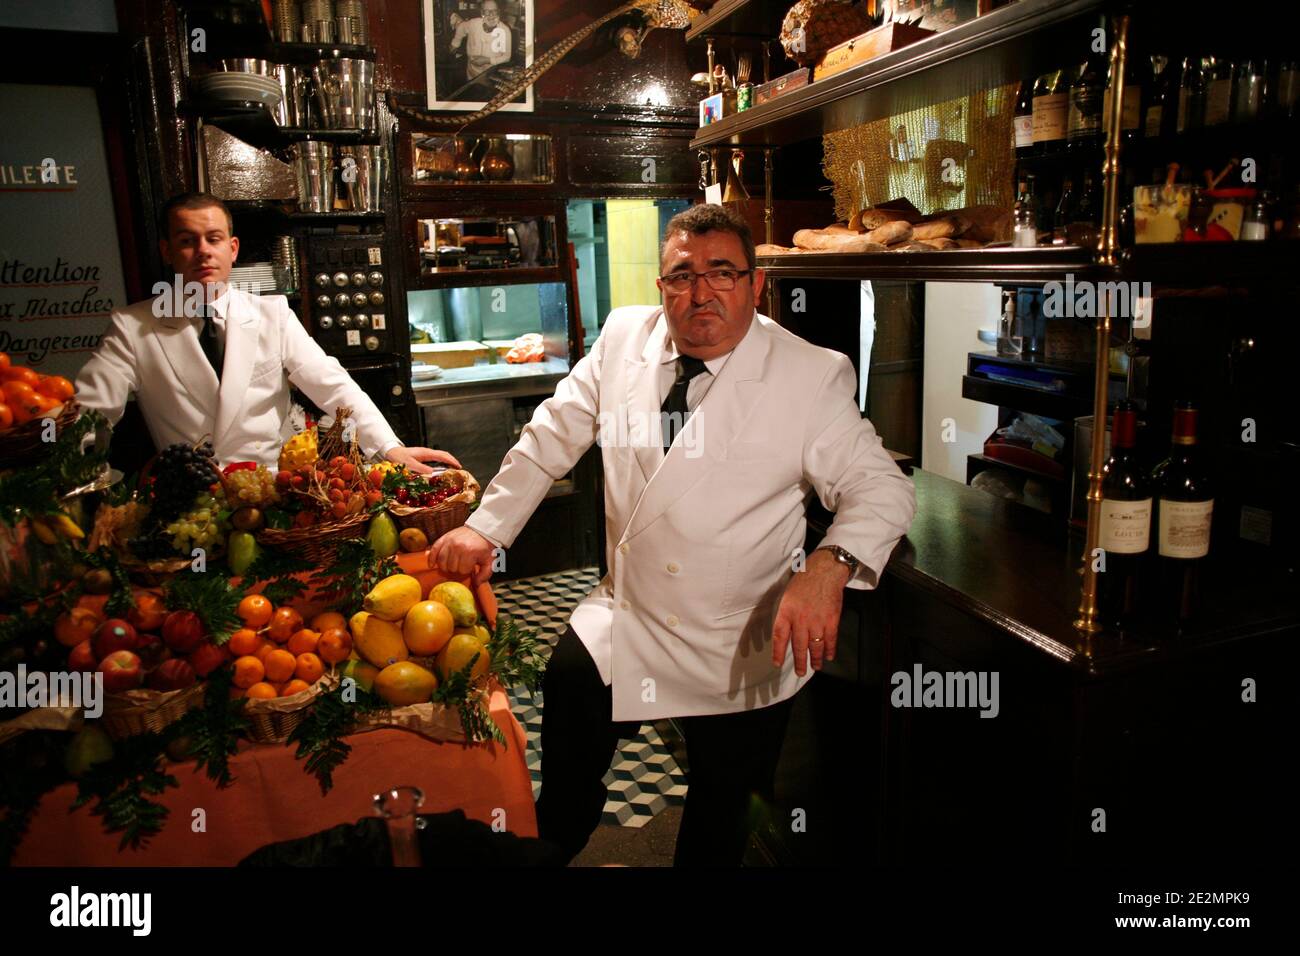 Louis Gadby, one of both owners, pictured at L'Ami Louis restaurant in Paris, France December 11, 2009. Photo by Jean-Luc Luyssen/ABACAPRESS.COM Stock Photo